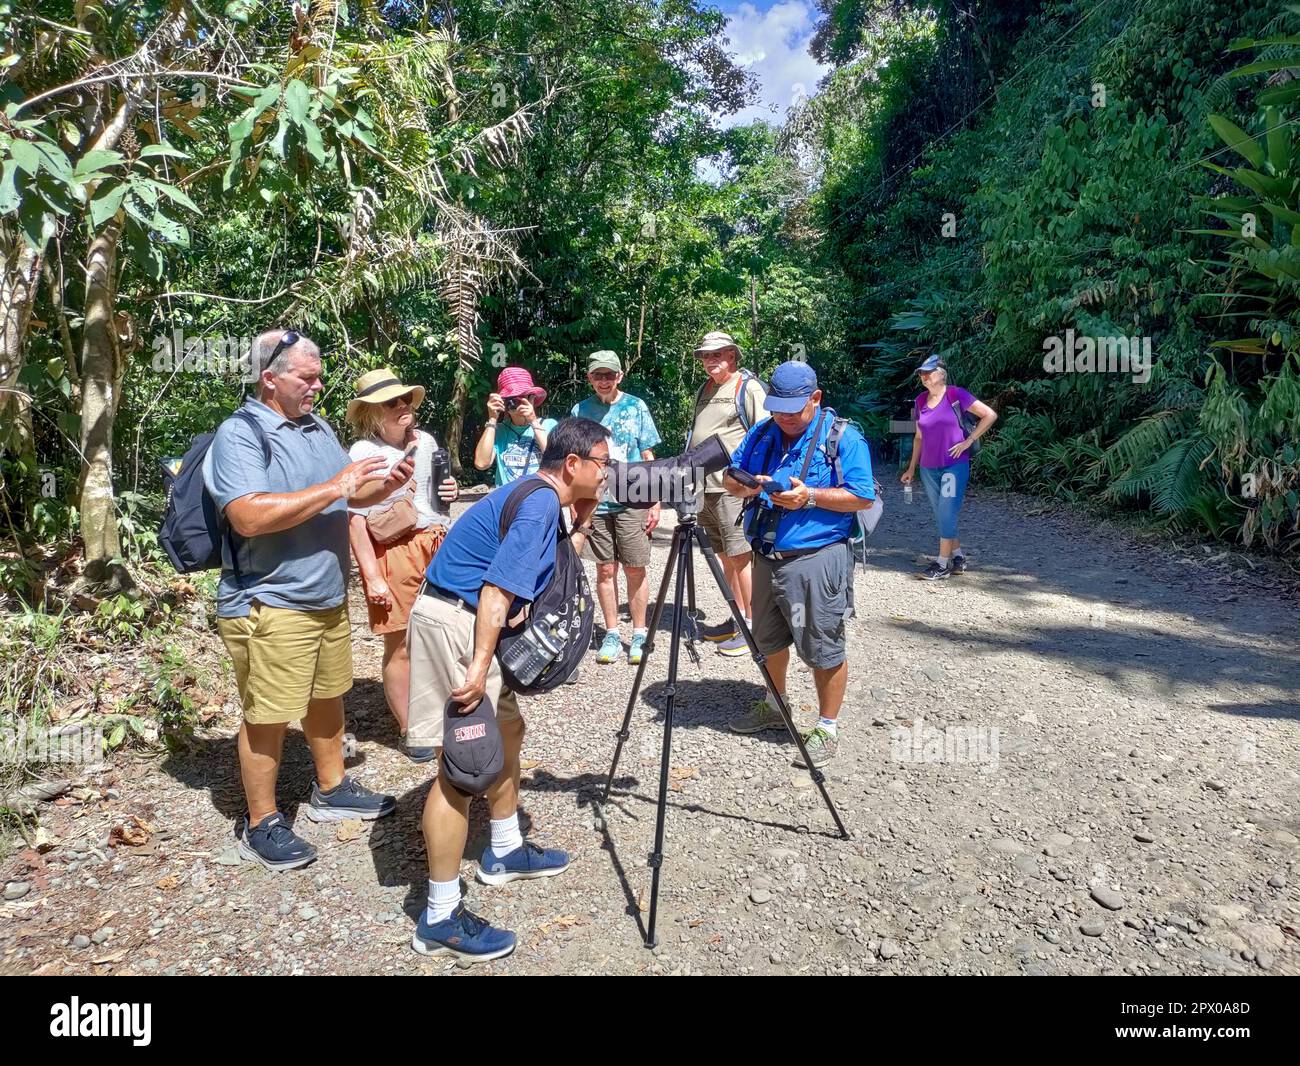 Manuel Antonio National Park, Costa Rica - Visitors use a spotting scope to view wildlife in the rainforest. Stock Photo